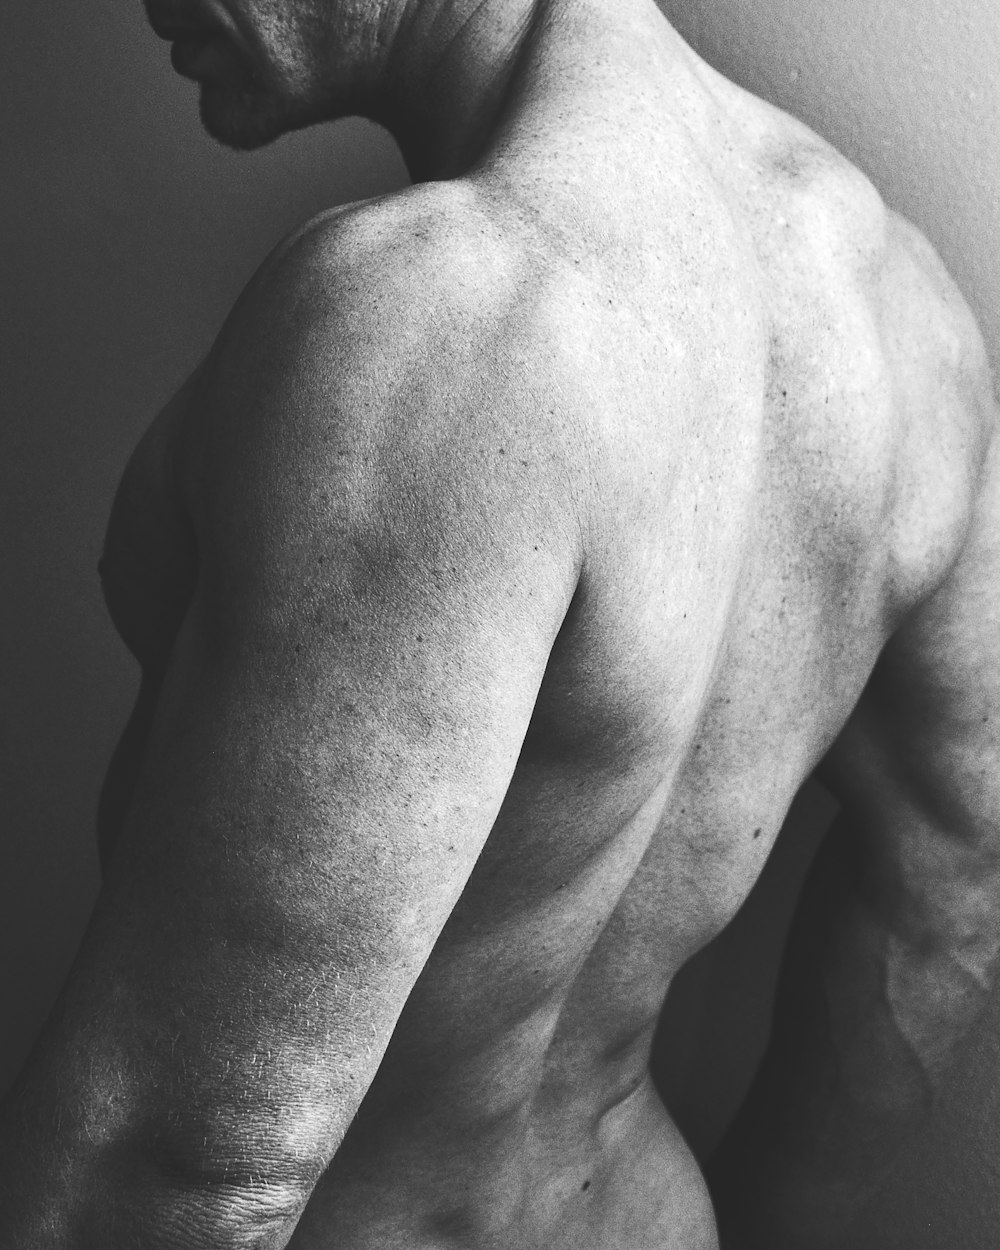 750+ Male Body Pictures | Download Free Images on Unsplash